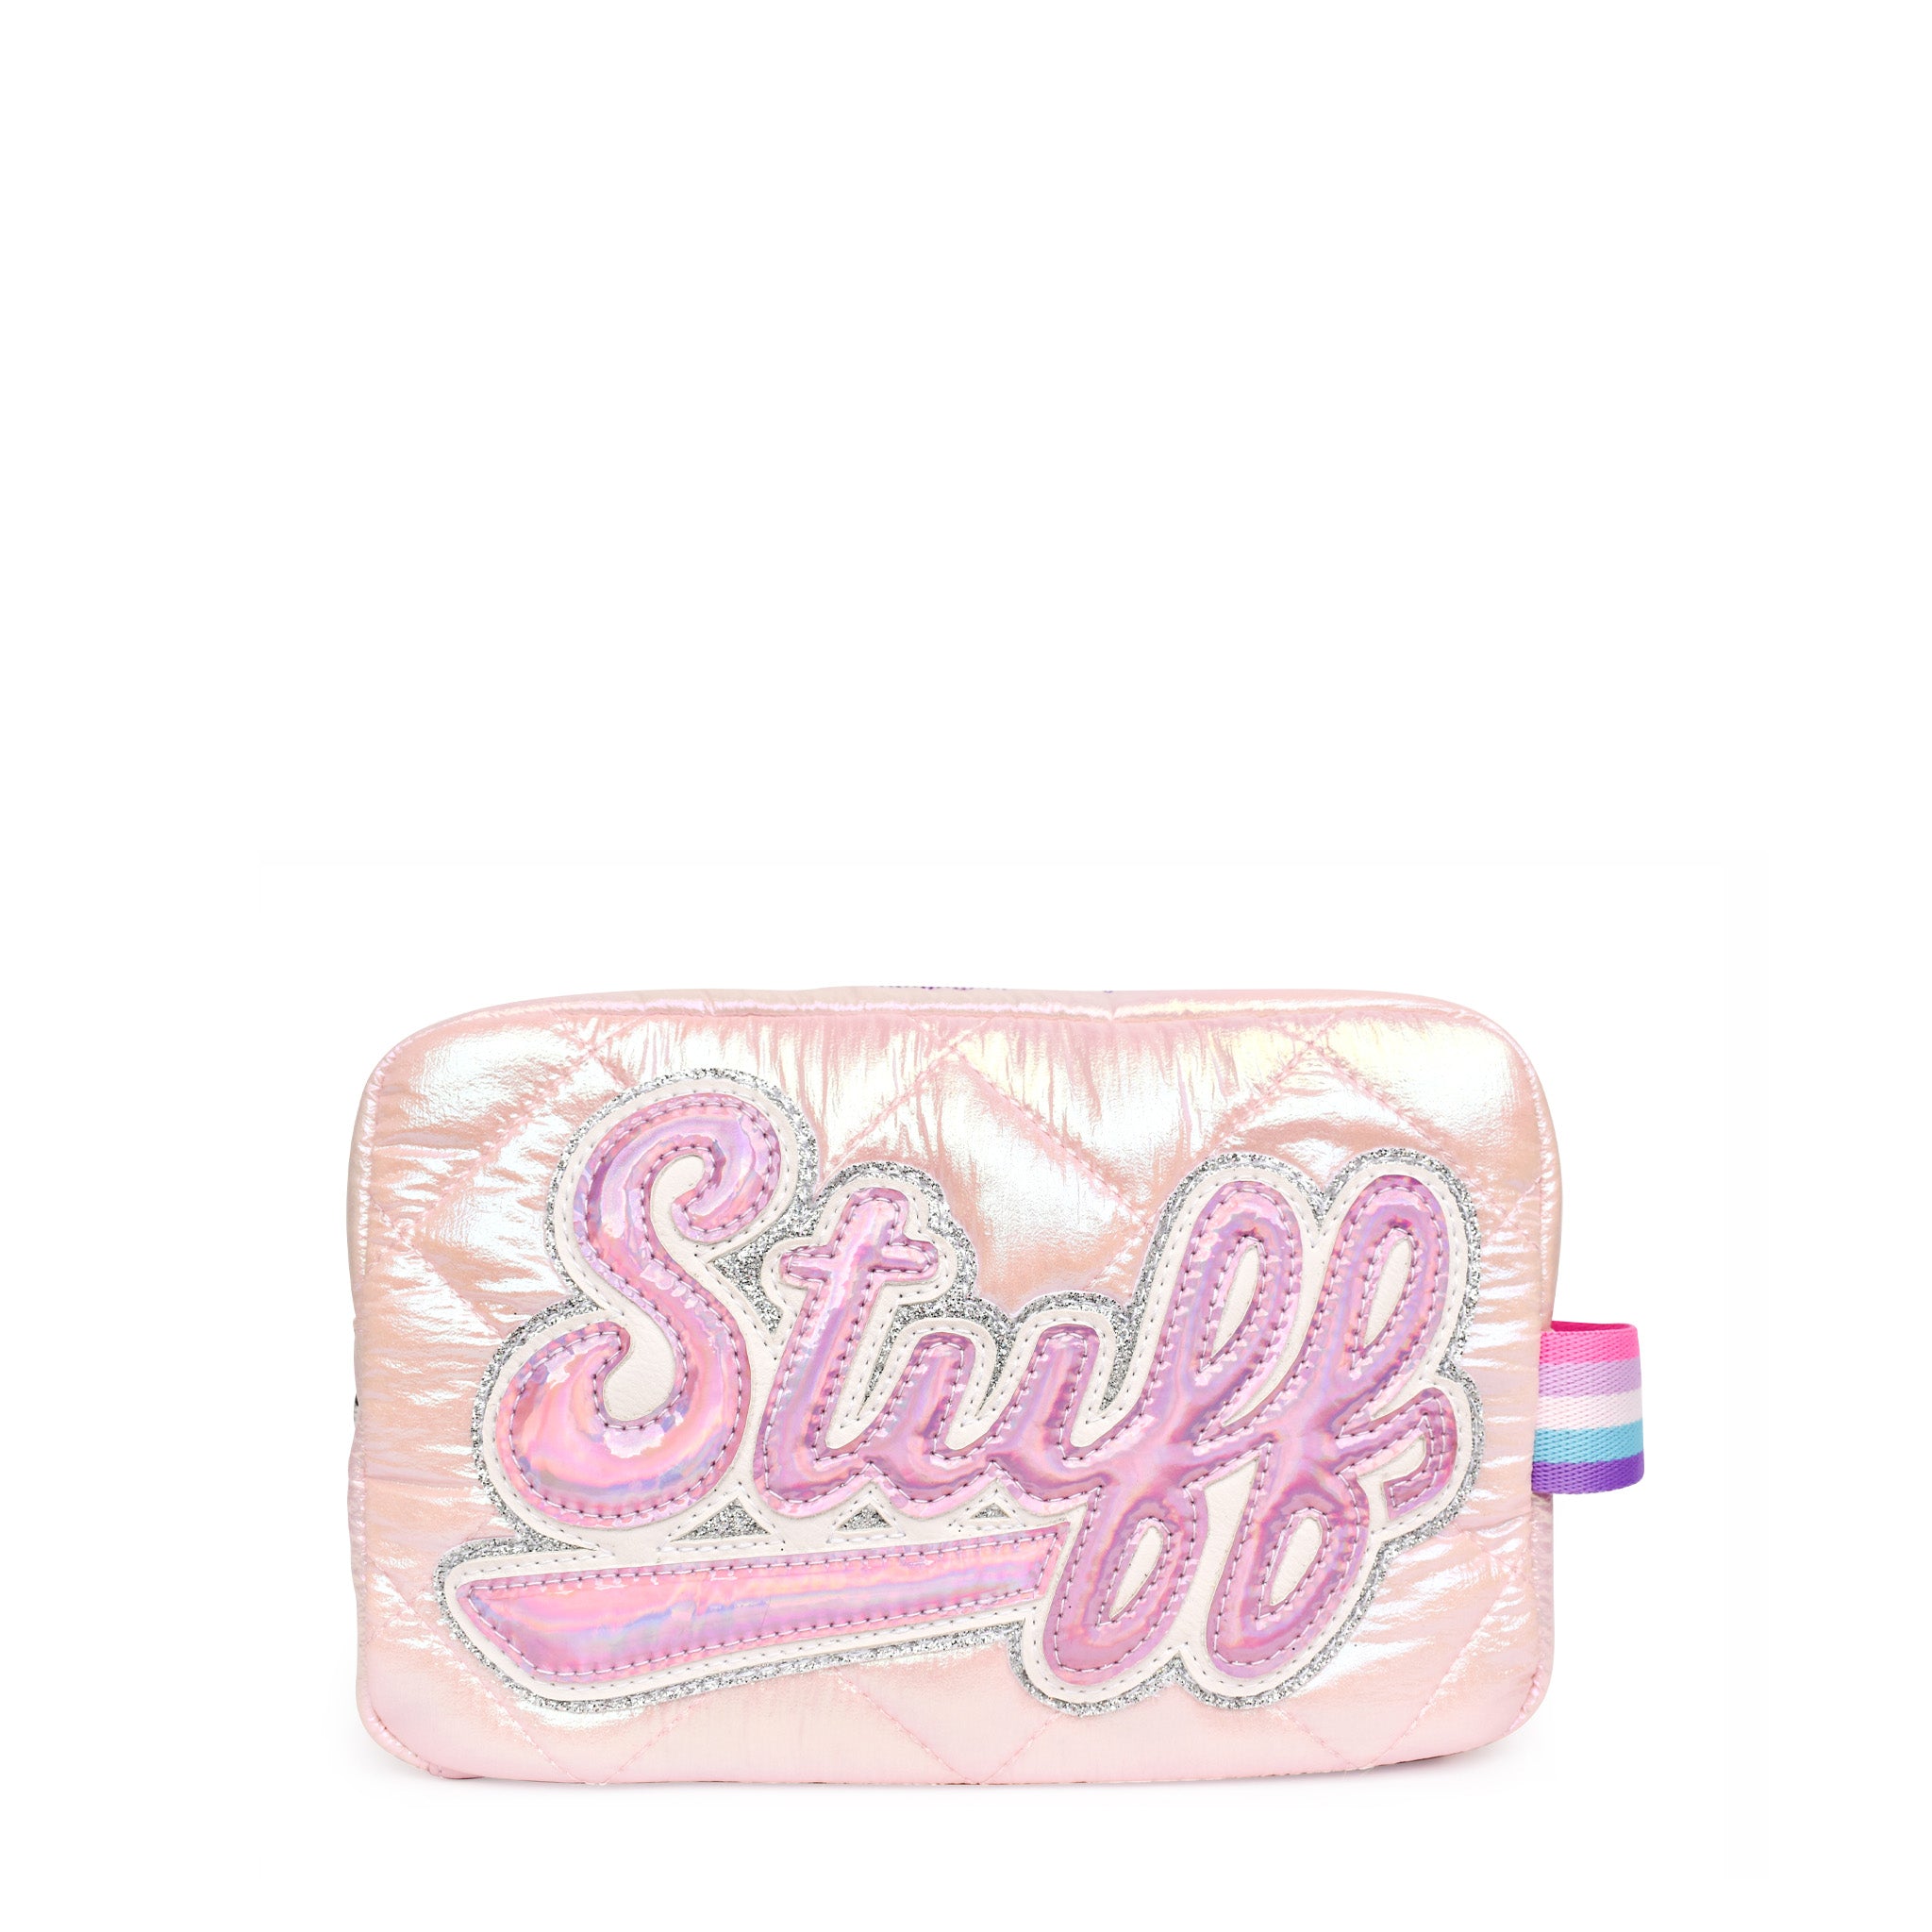 'Stuff' Quilted Metallic Puffer Pouch